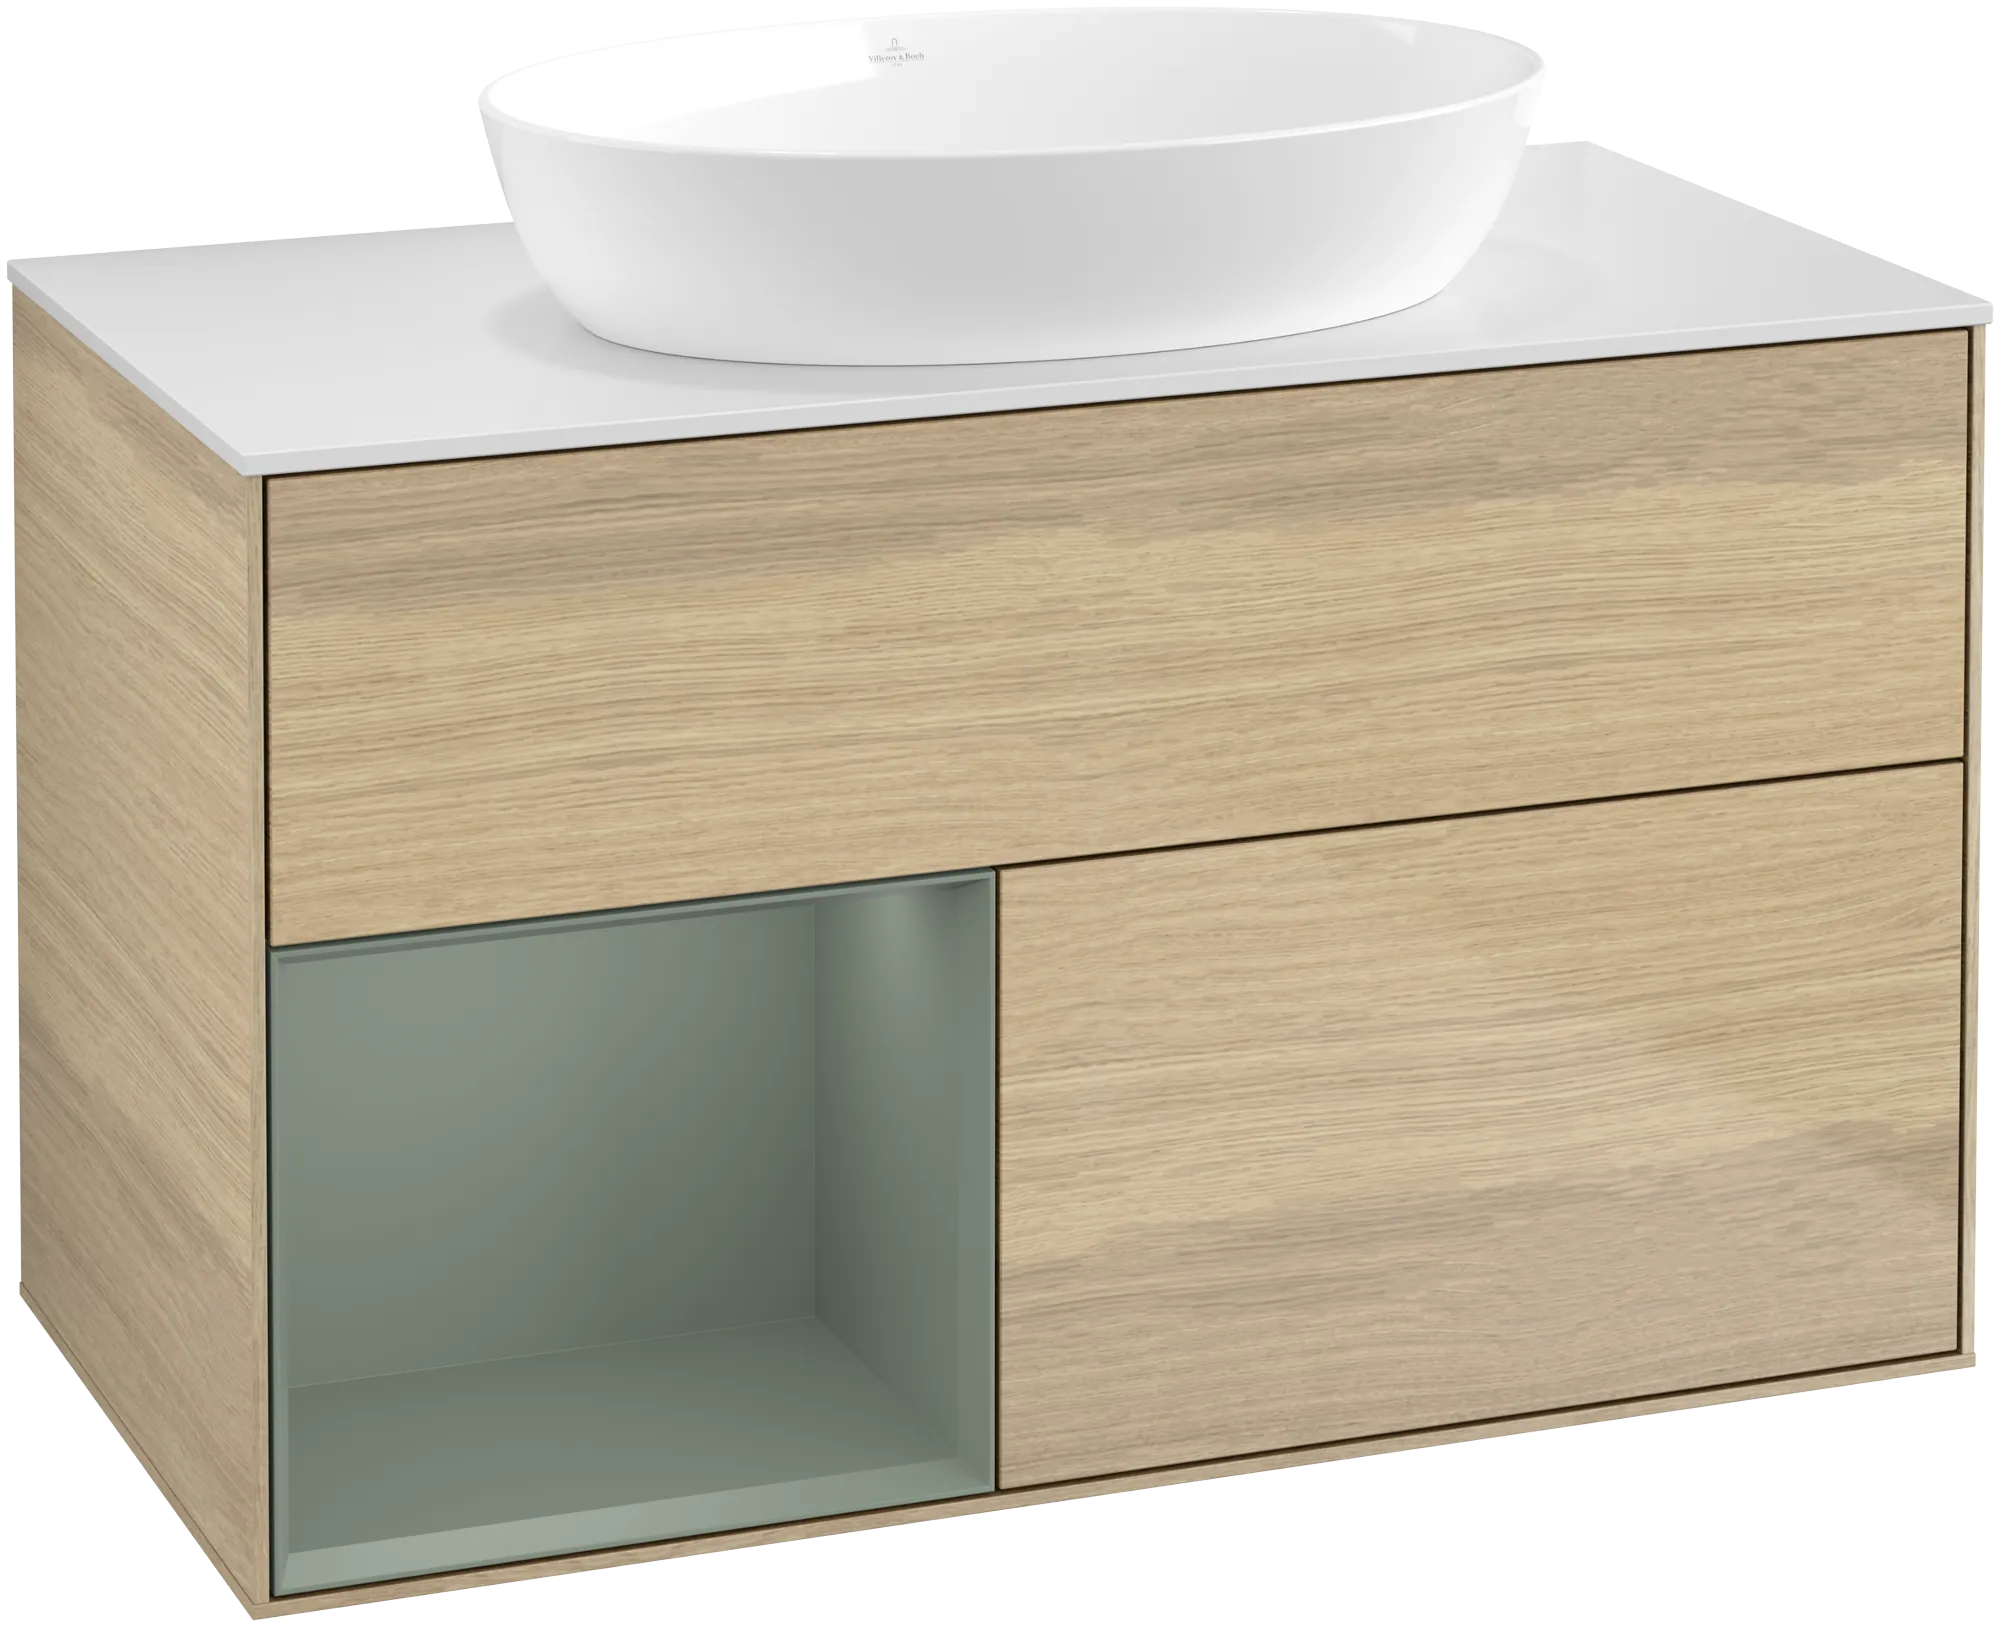 Picture of VILLEROY BOCH Finion Vanity unit, with lighting, 2 pull-out compartments, 1000 x 603 x 501 mm, Oak Veneer / Olive Matt Lacquer / Glass White Matt #GA11GMPC